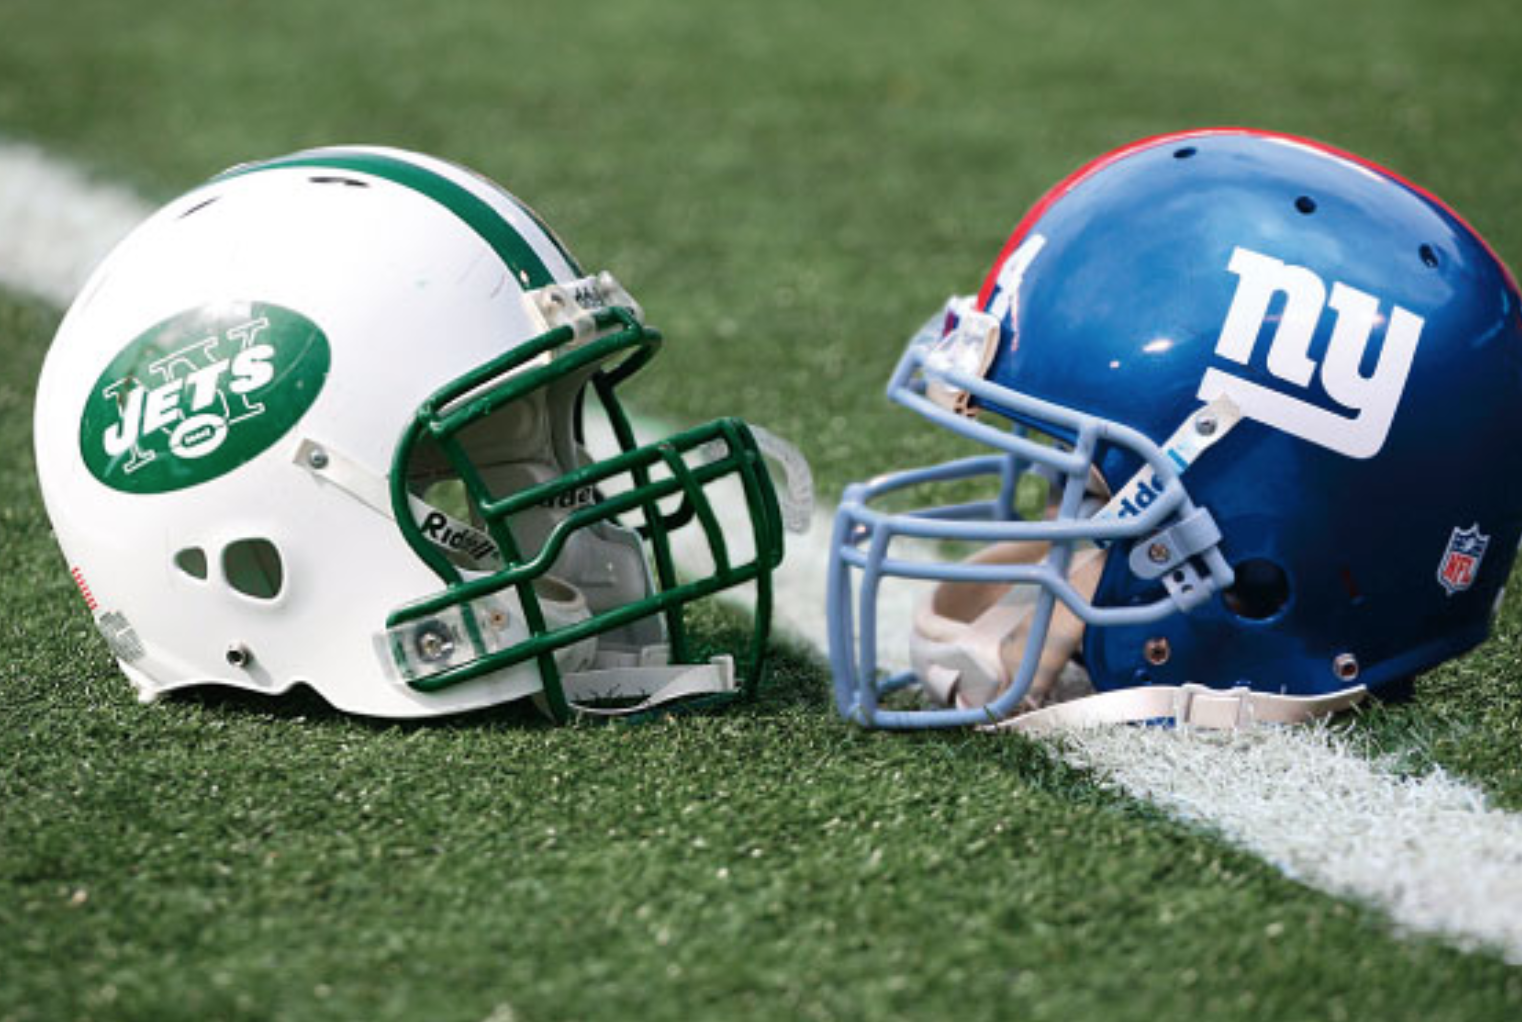 Jets and Giants helmets